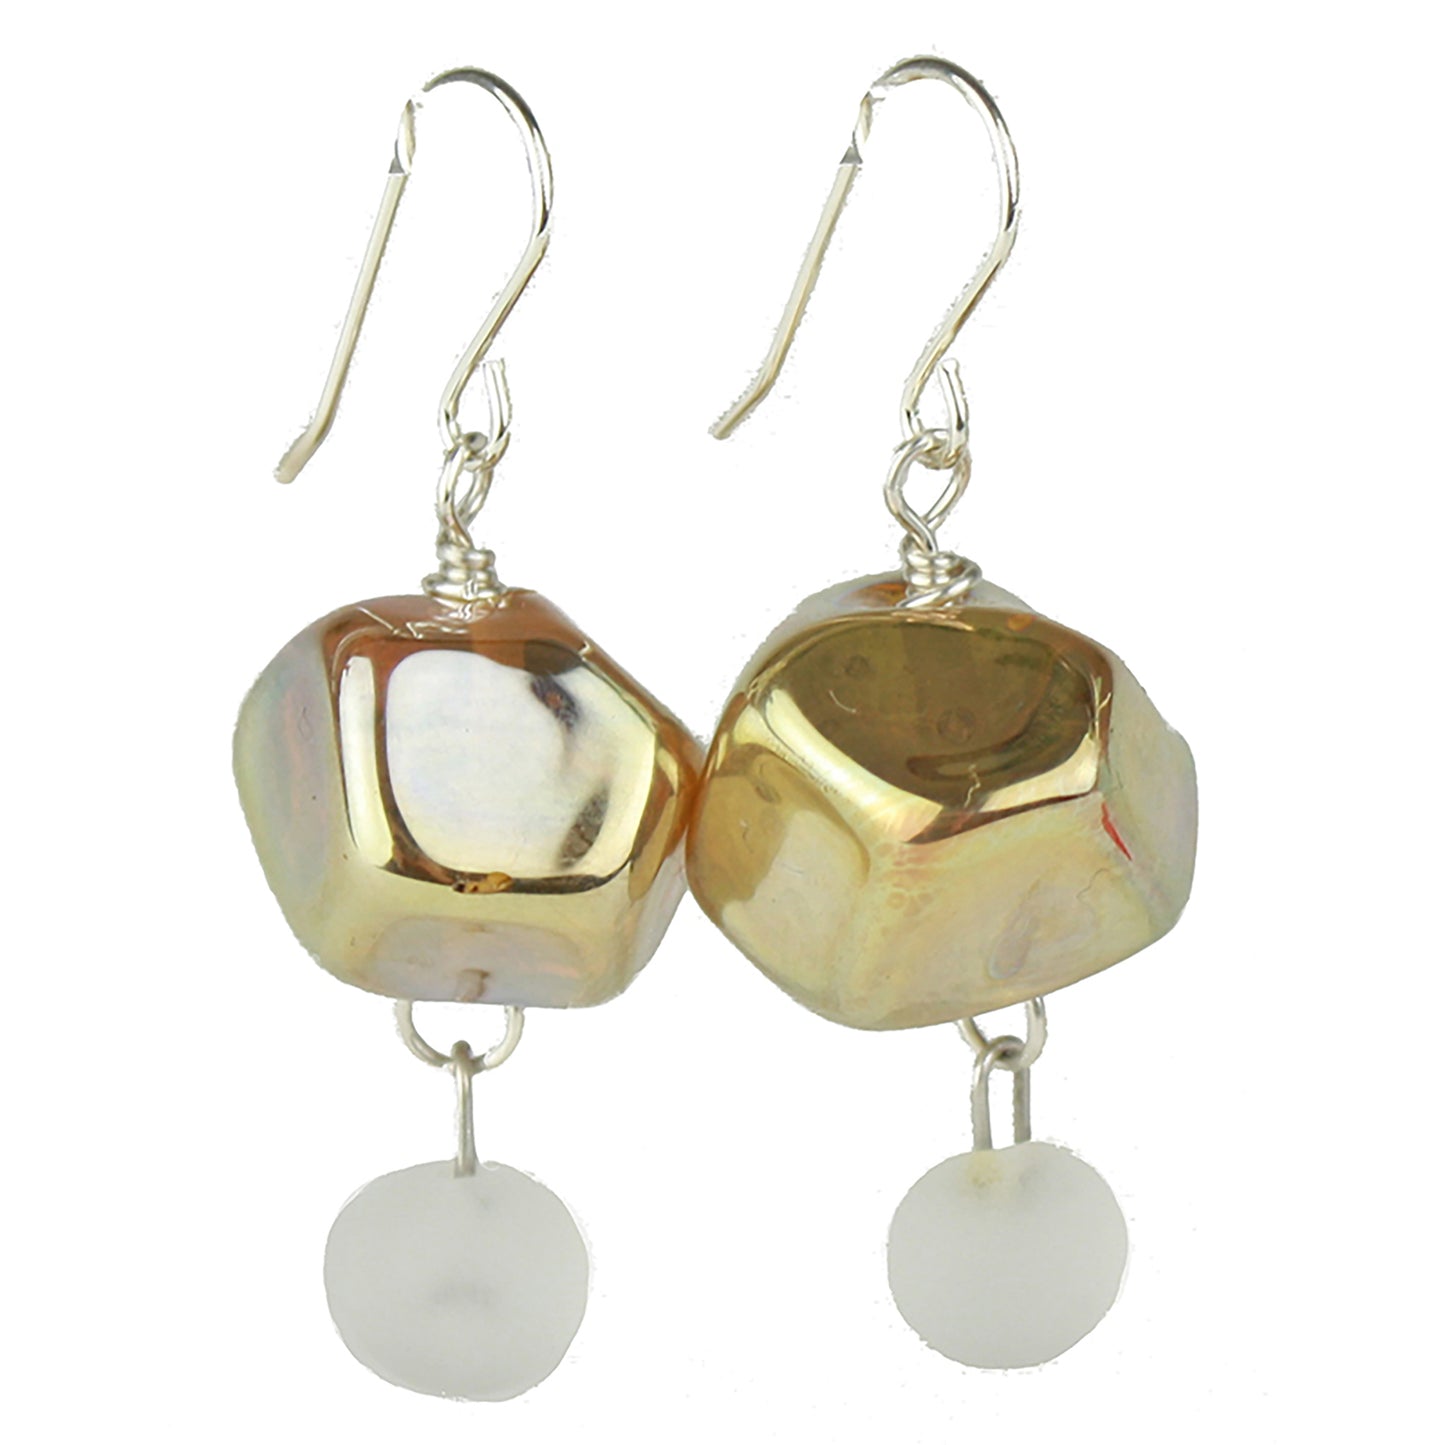 Nugget and charm earrings - gold and white